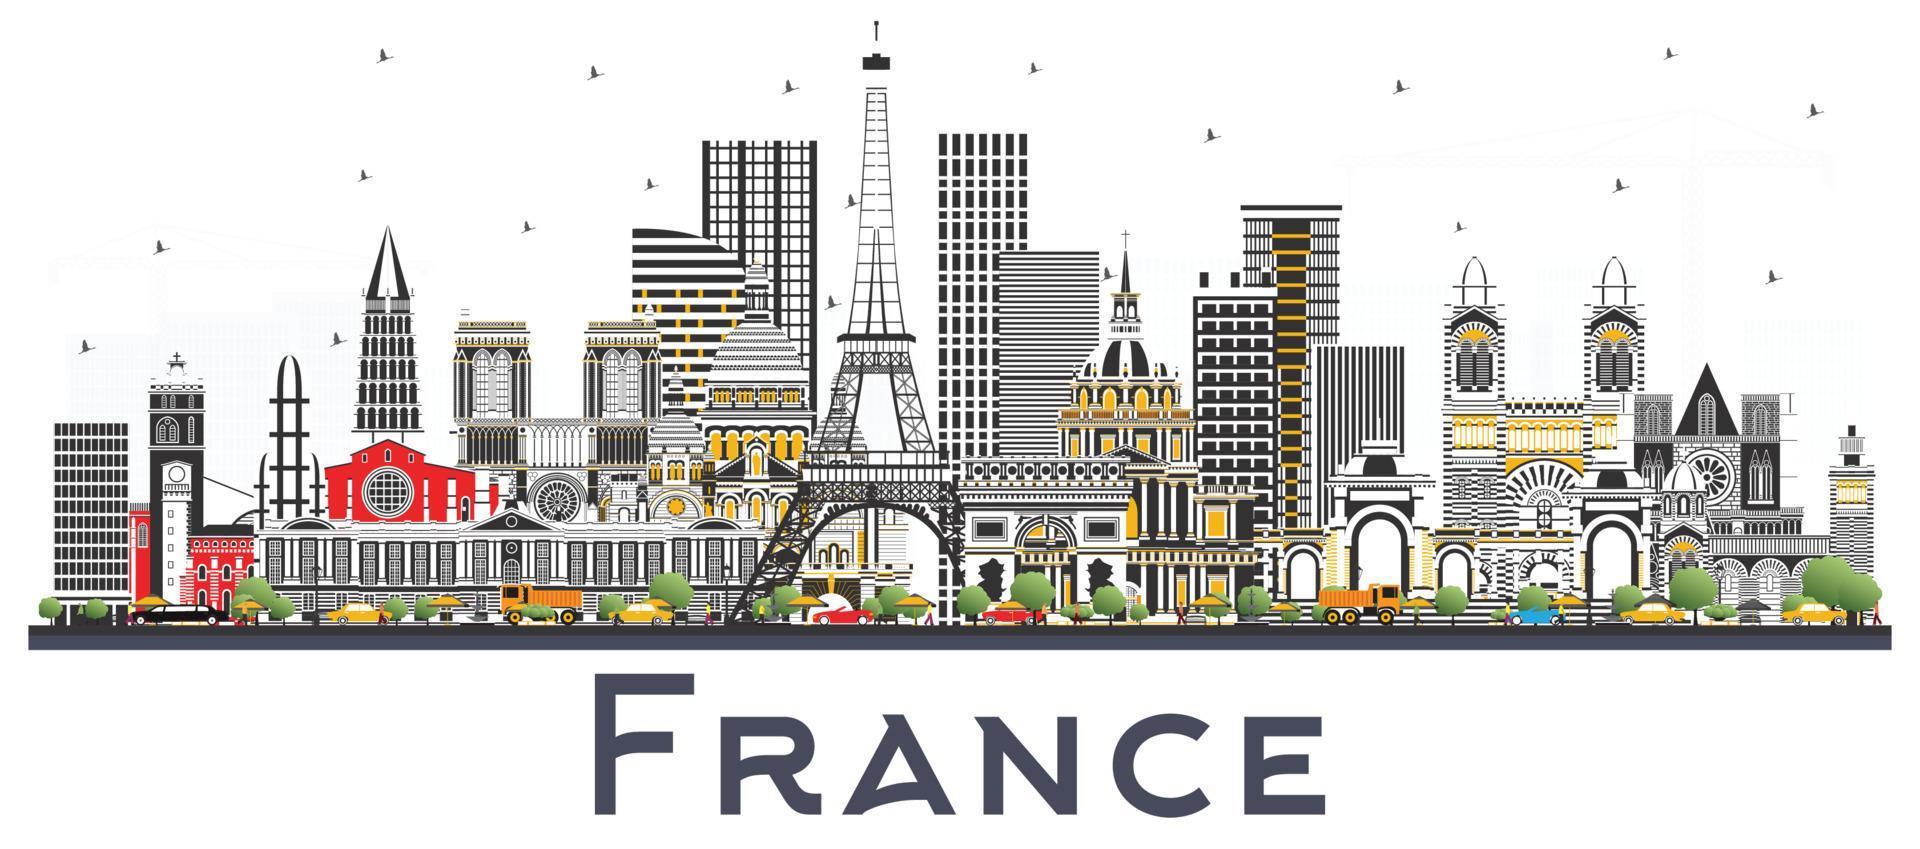 France Skyline with Gray Buildings Isolated on White. vector